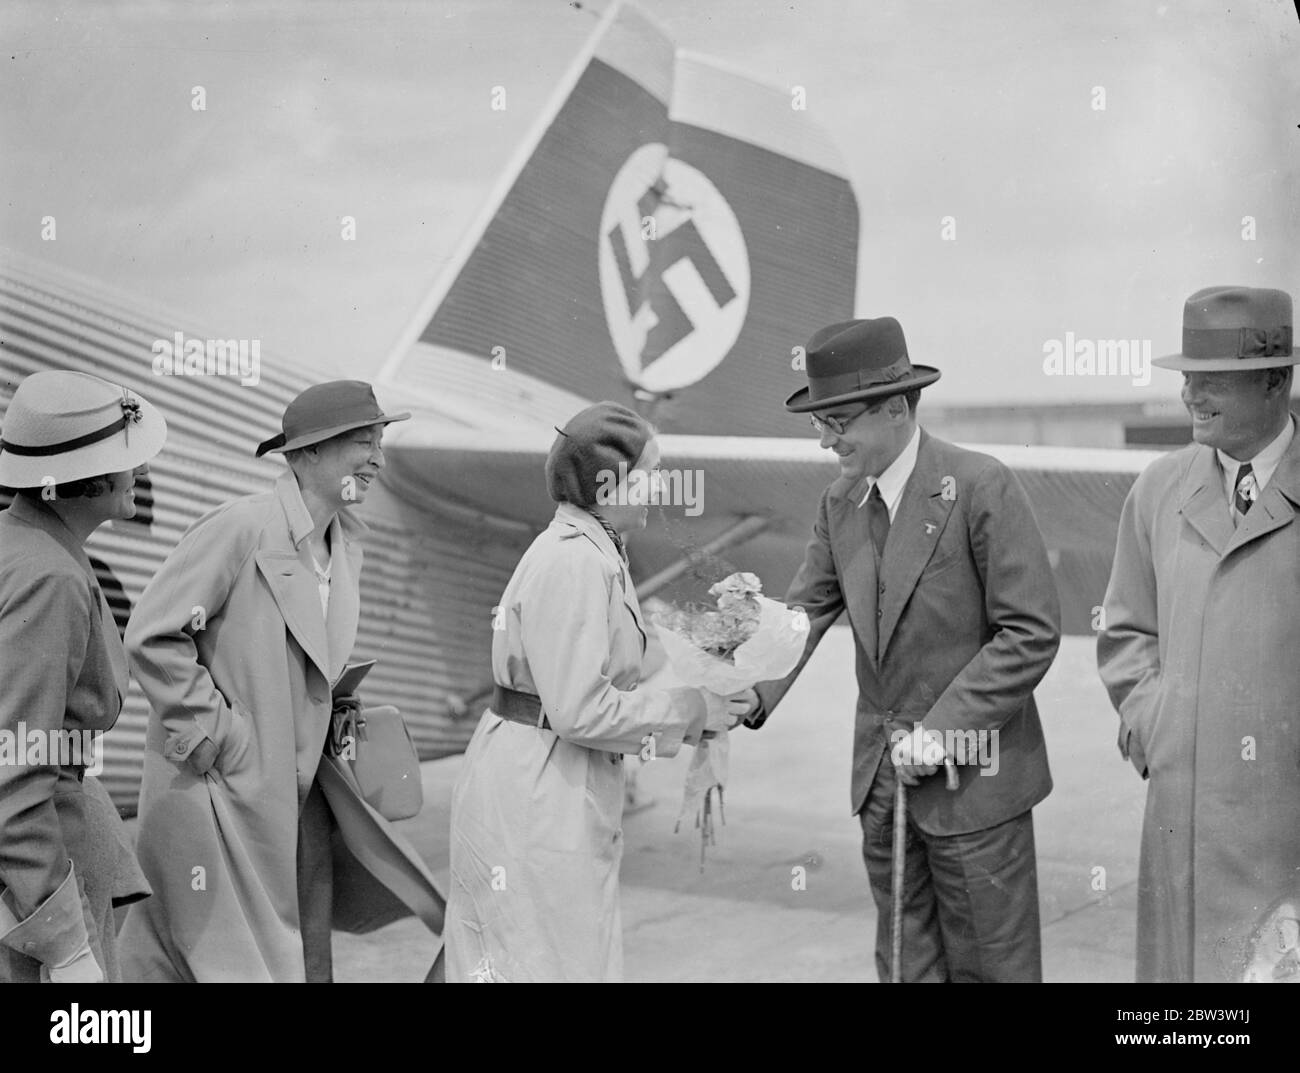 Nazi perfect woman arrives by air to attend London conference . Frau Gartrud Scholz Klink , Germany ' s perfect Nazi women , arrived at Croydon Aerodrome by air , to attend the Third International Congress for Social Work in London . Frau Scholz Klink , who is not yet 40 is here of the National Socialist womanhood . She fulfills all the idols of Nazi womanhood , and is an ardent advocate of the ' back to the kitchen movement . She was welcomed by Prince von Bismarck , German Charge d ' Affaires in London . Photo shows , Frau Gatrud Scholz Klink chatting with Prince von Bismark on arrival at Cr Stock Photo